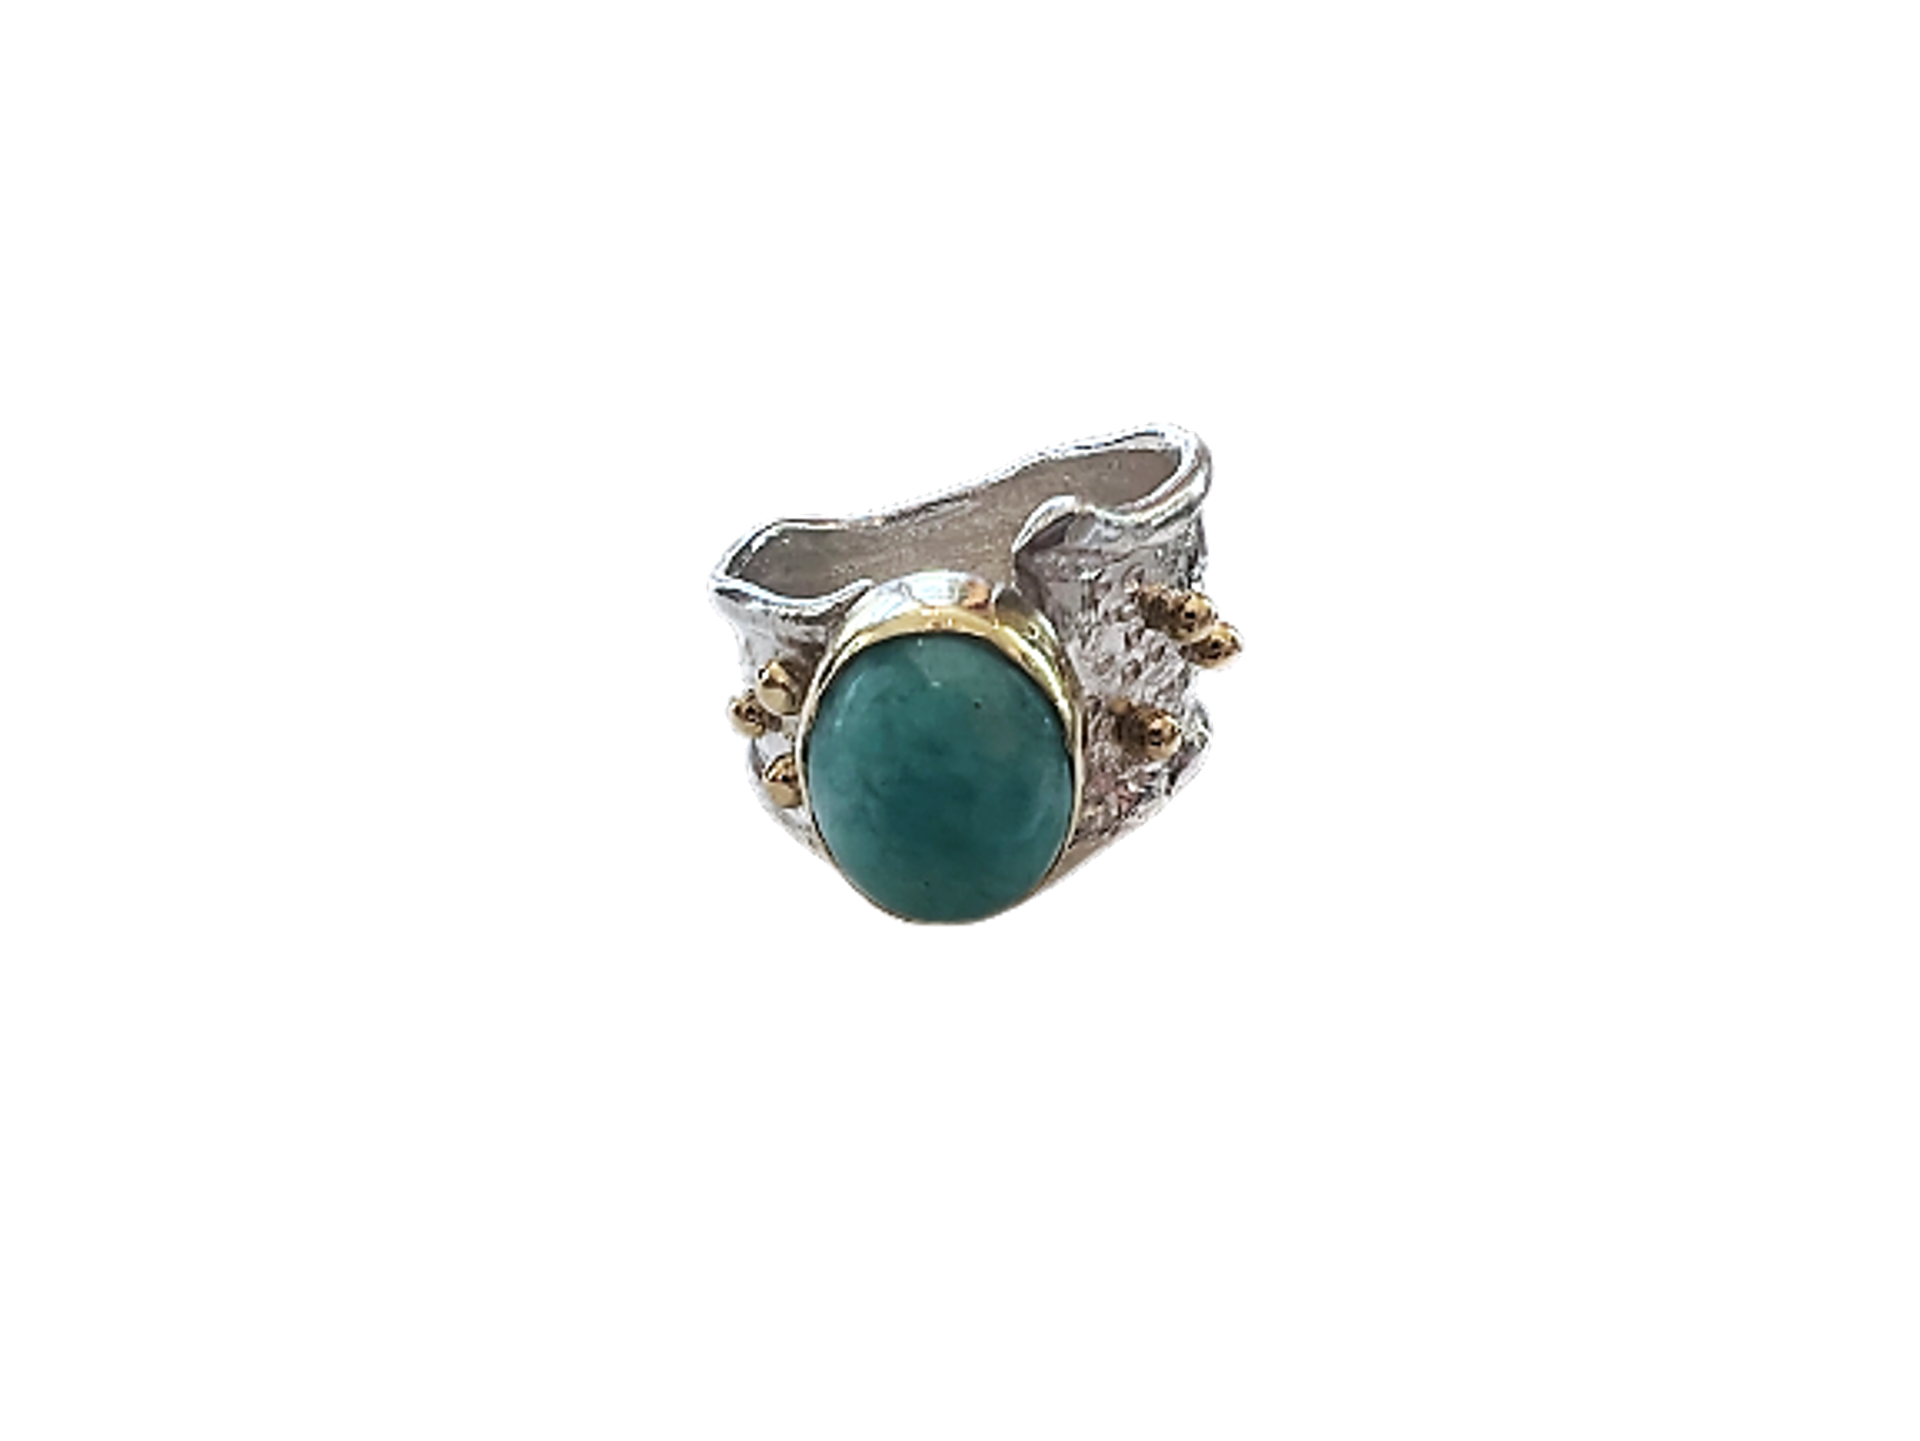 Ripple Ring - Amazonite with 18k Gold Accents by Kristen Baird